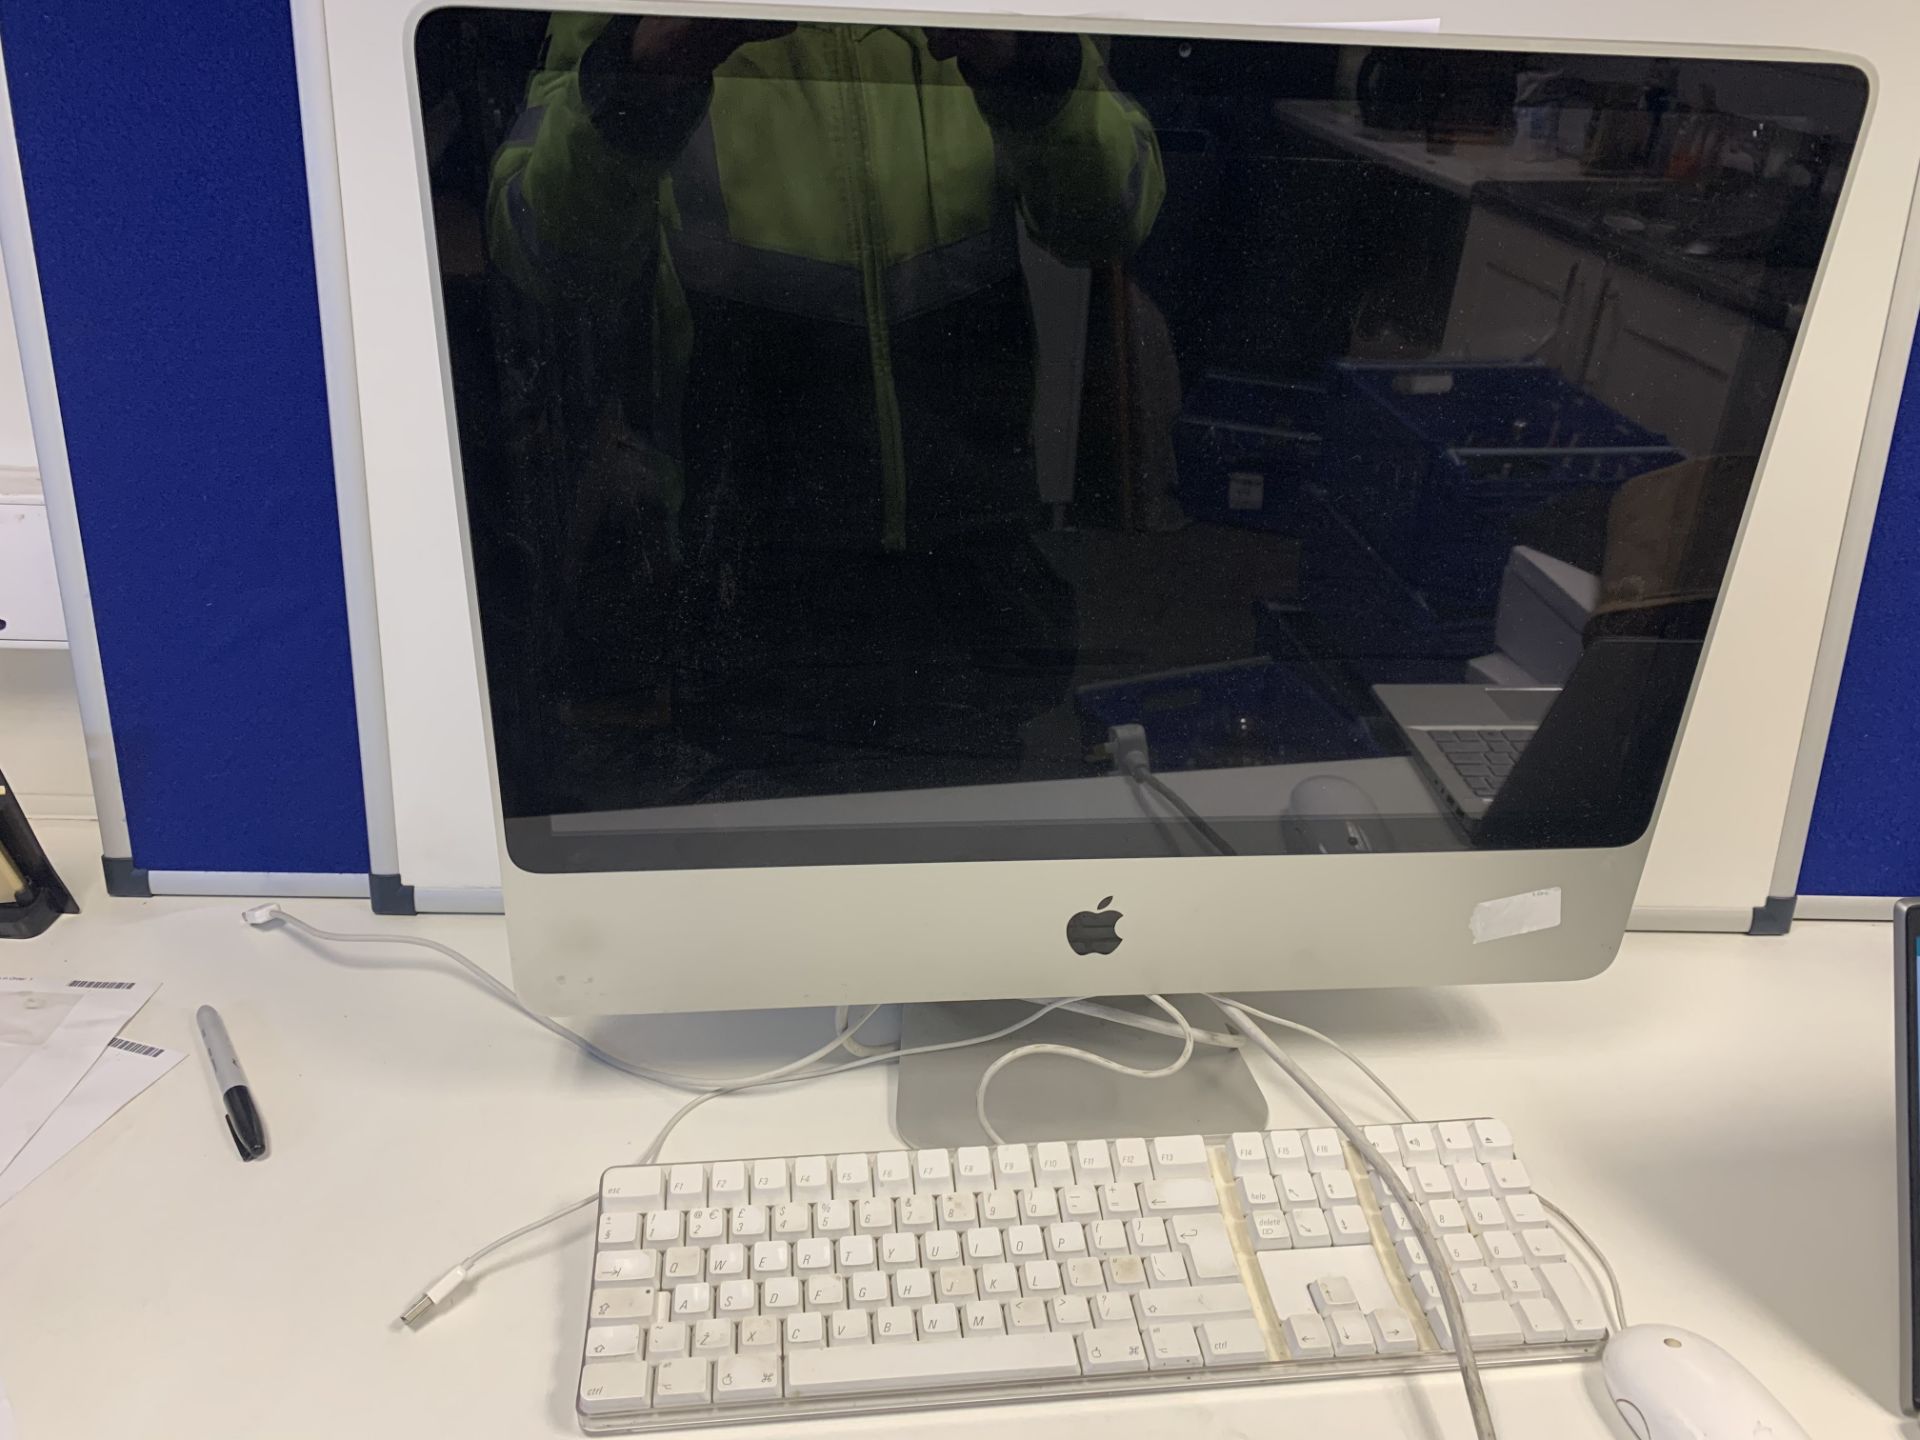 APPLE IMAC ALL IN ONE PC 2.93 GHZ PROCESSOR APPLE X OPERATING SYSTEM 27 INCH SCREEN 640GB HARD DRIVE